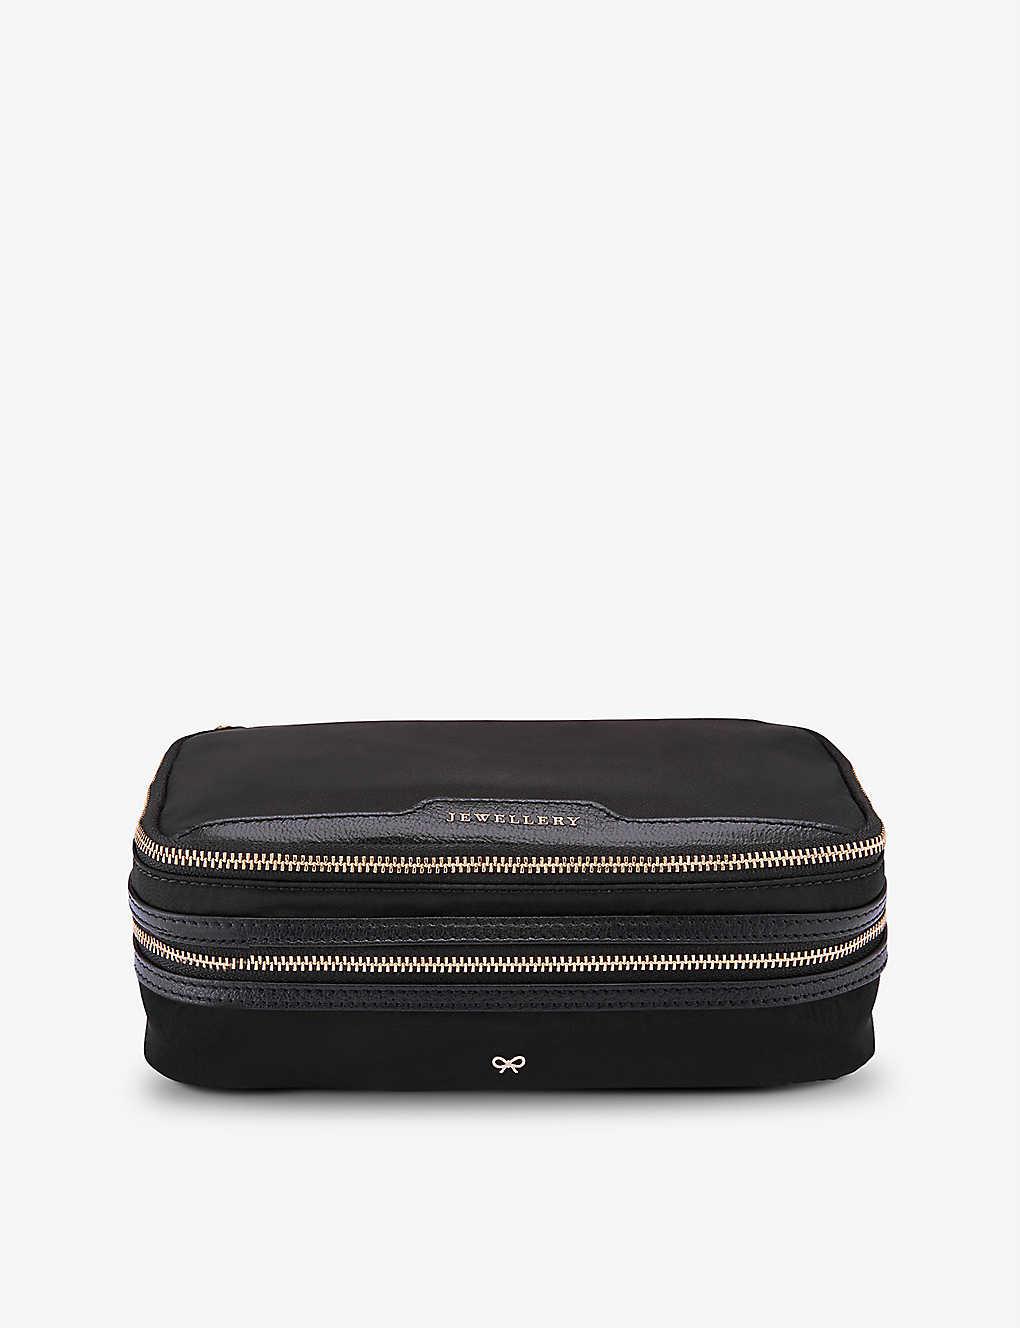 Anya Hindmarch Jewellery Recycled-nylon Jewellery Pouch in Black | Lyst